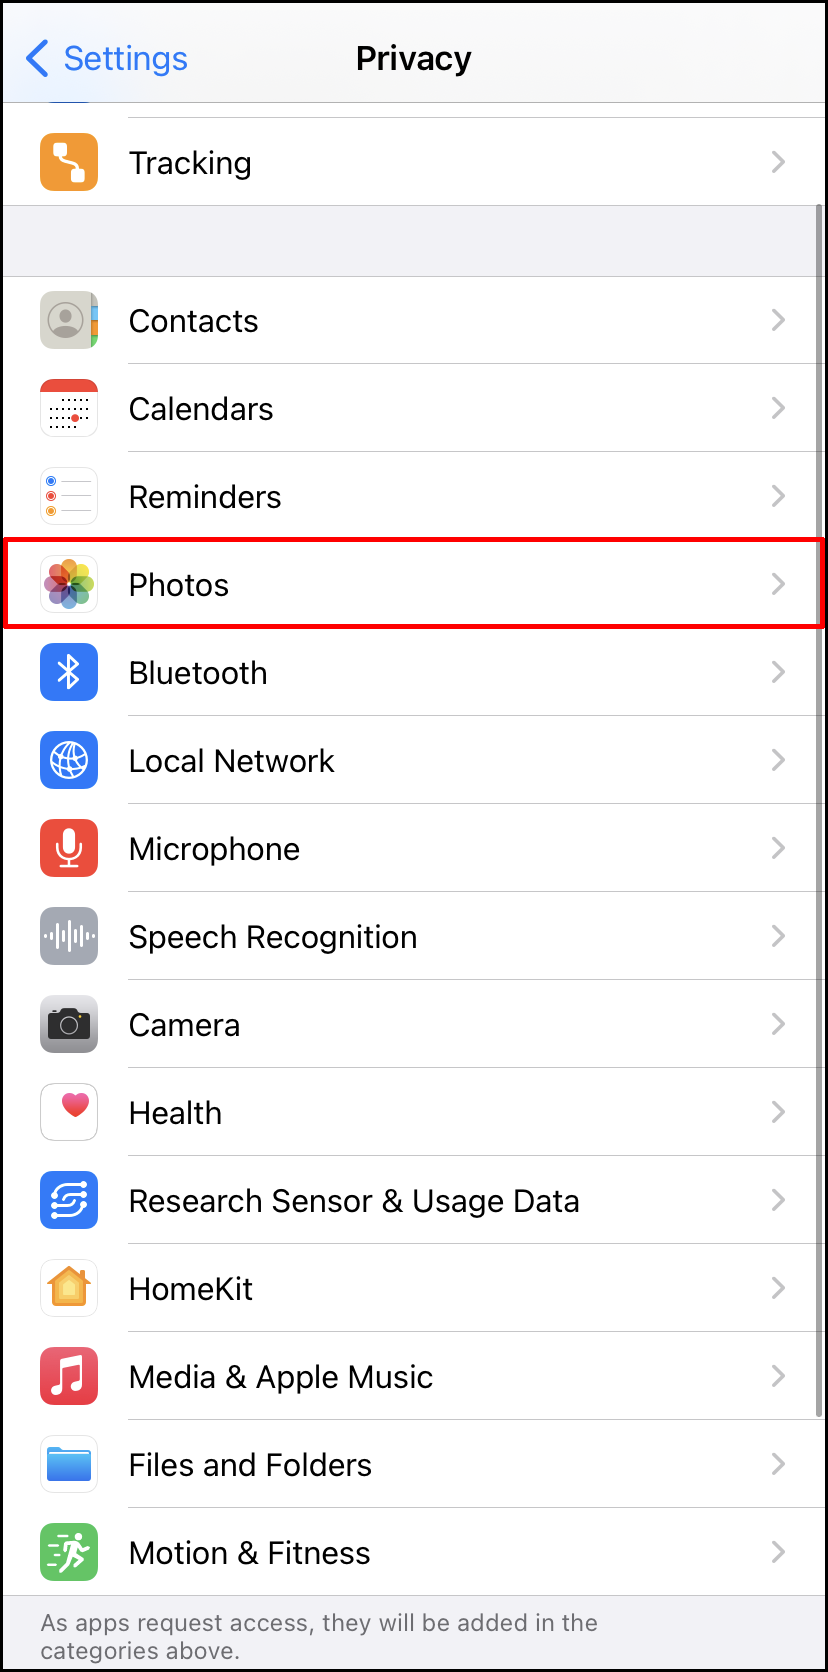 Privacy_Settings_Photos_iOS.png